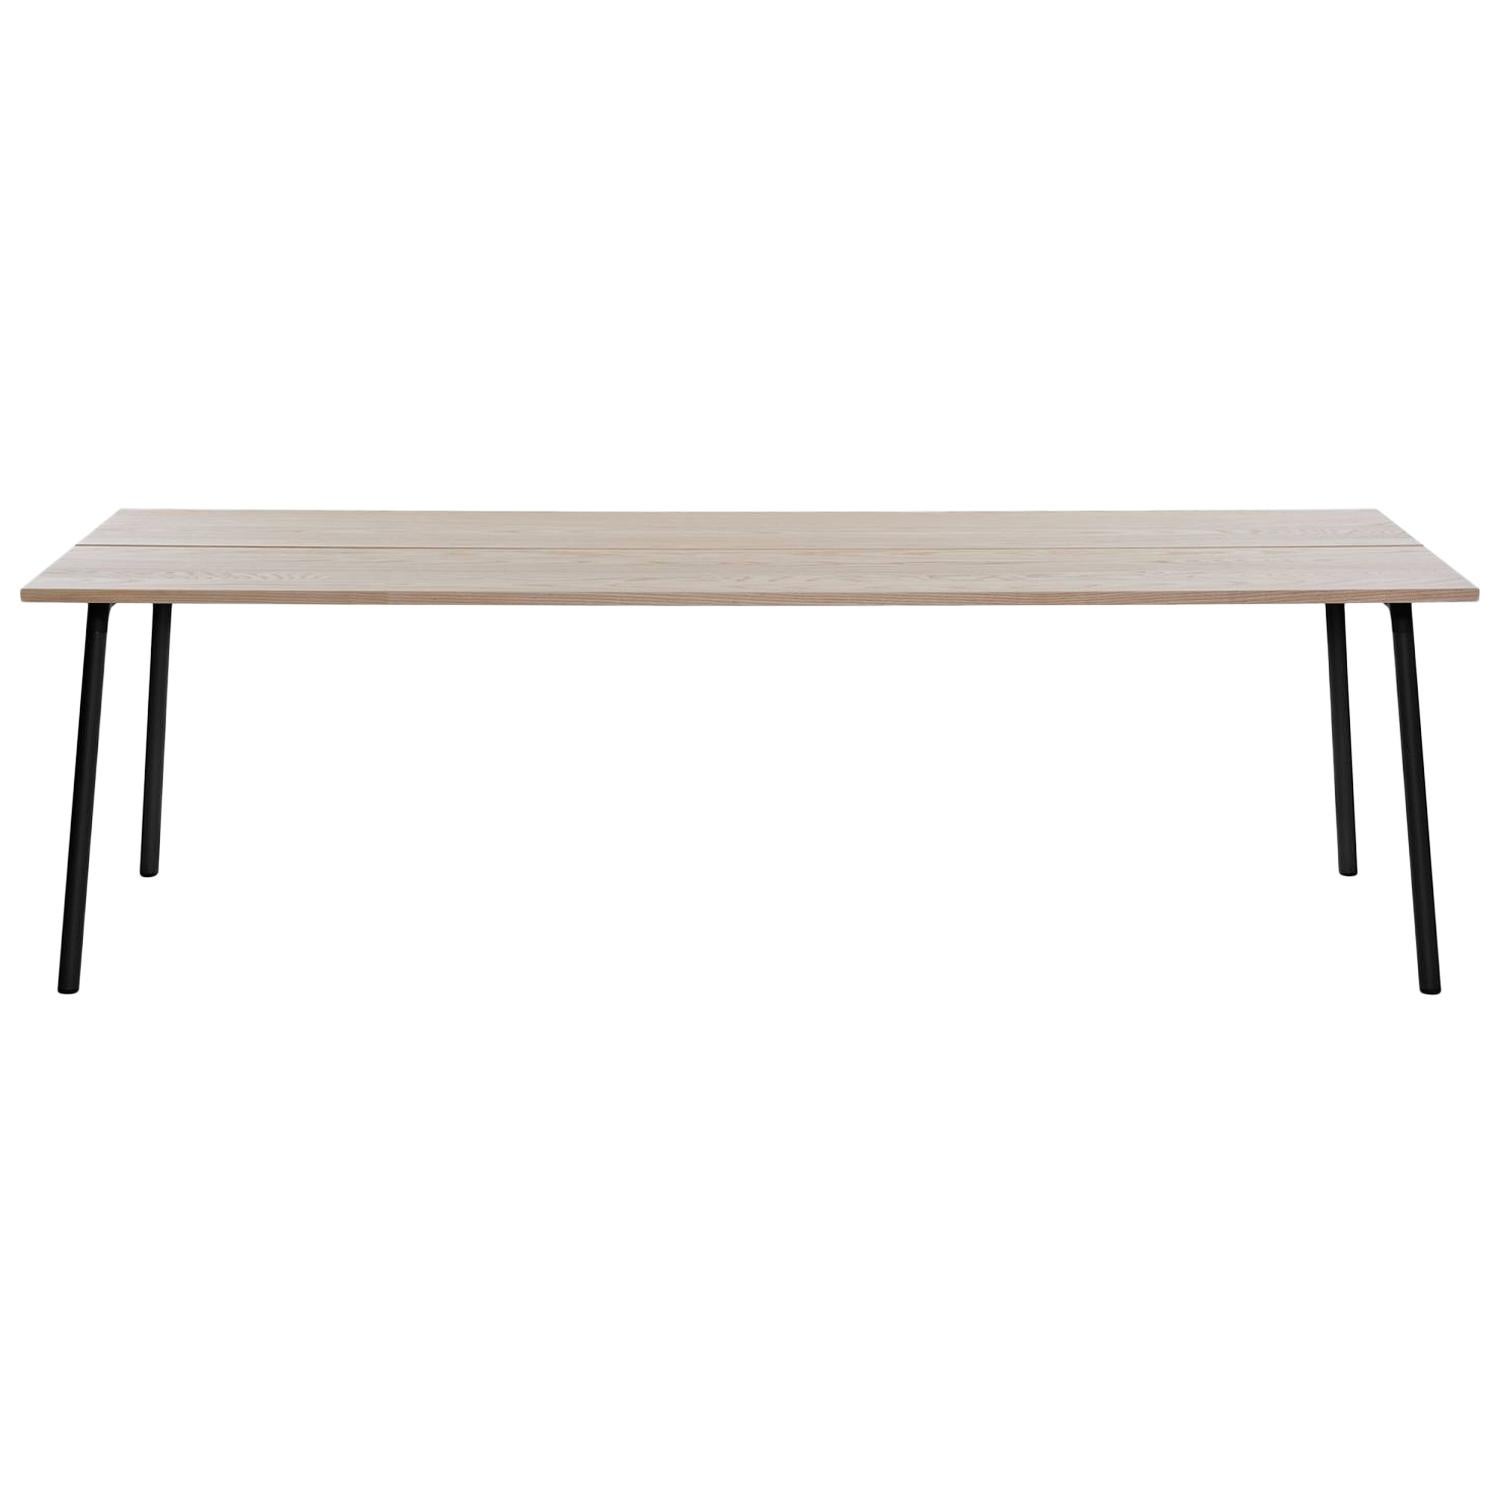 Emeco Run Extra Large Table in Black Powder-Coat and Ash, Sam Hecht & Kim Colin For Sale